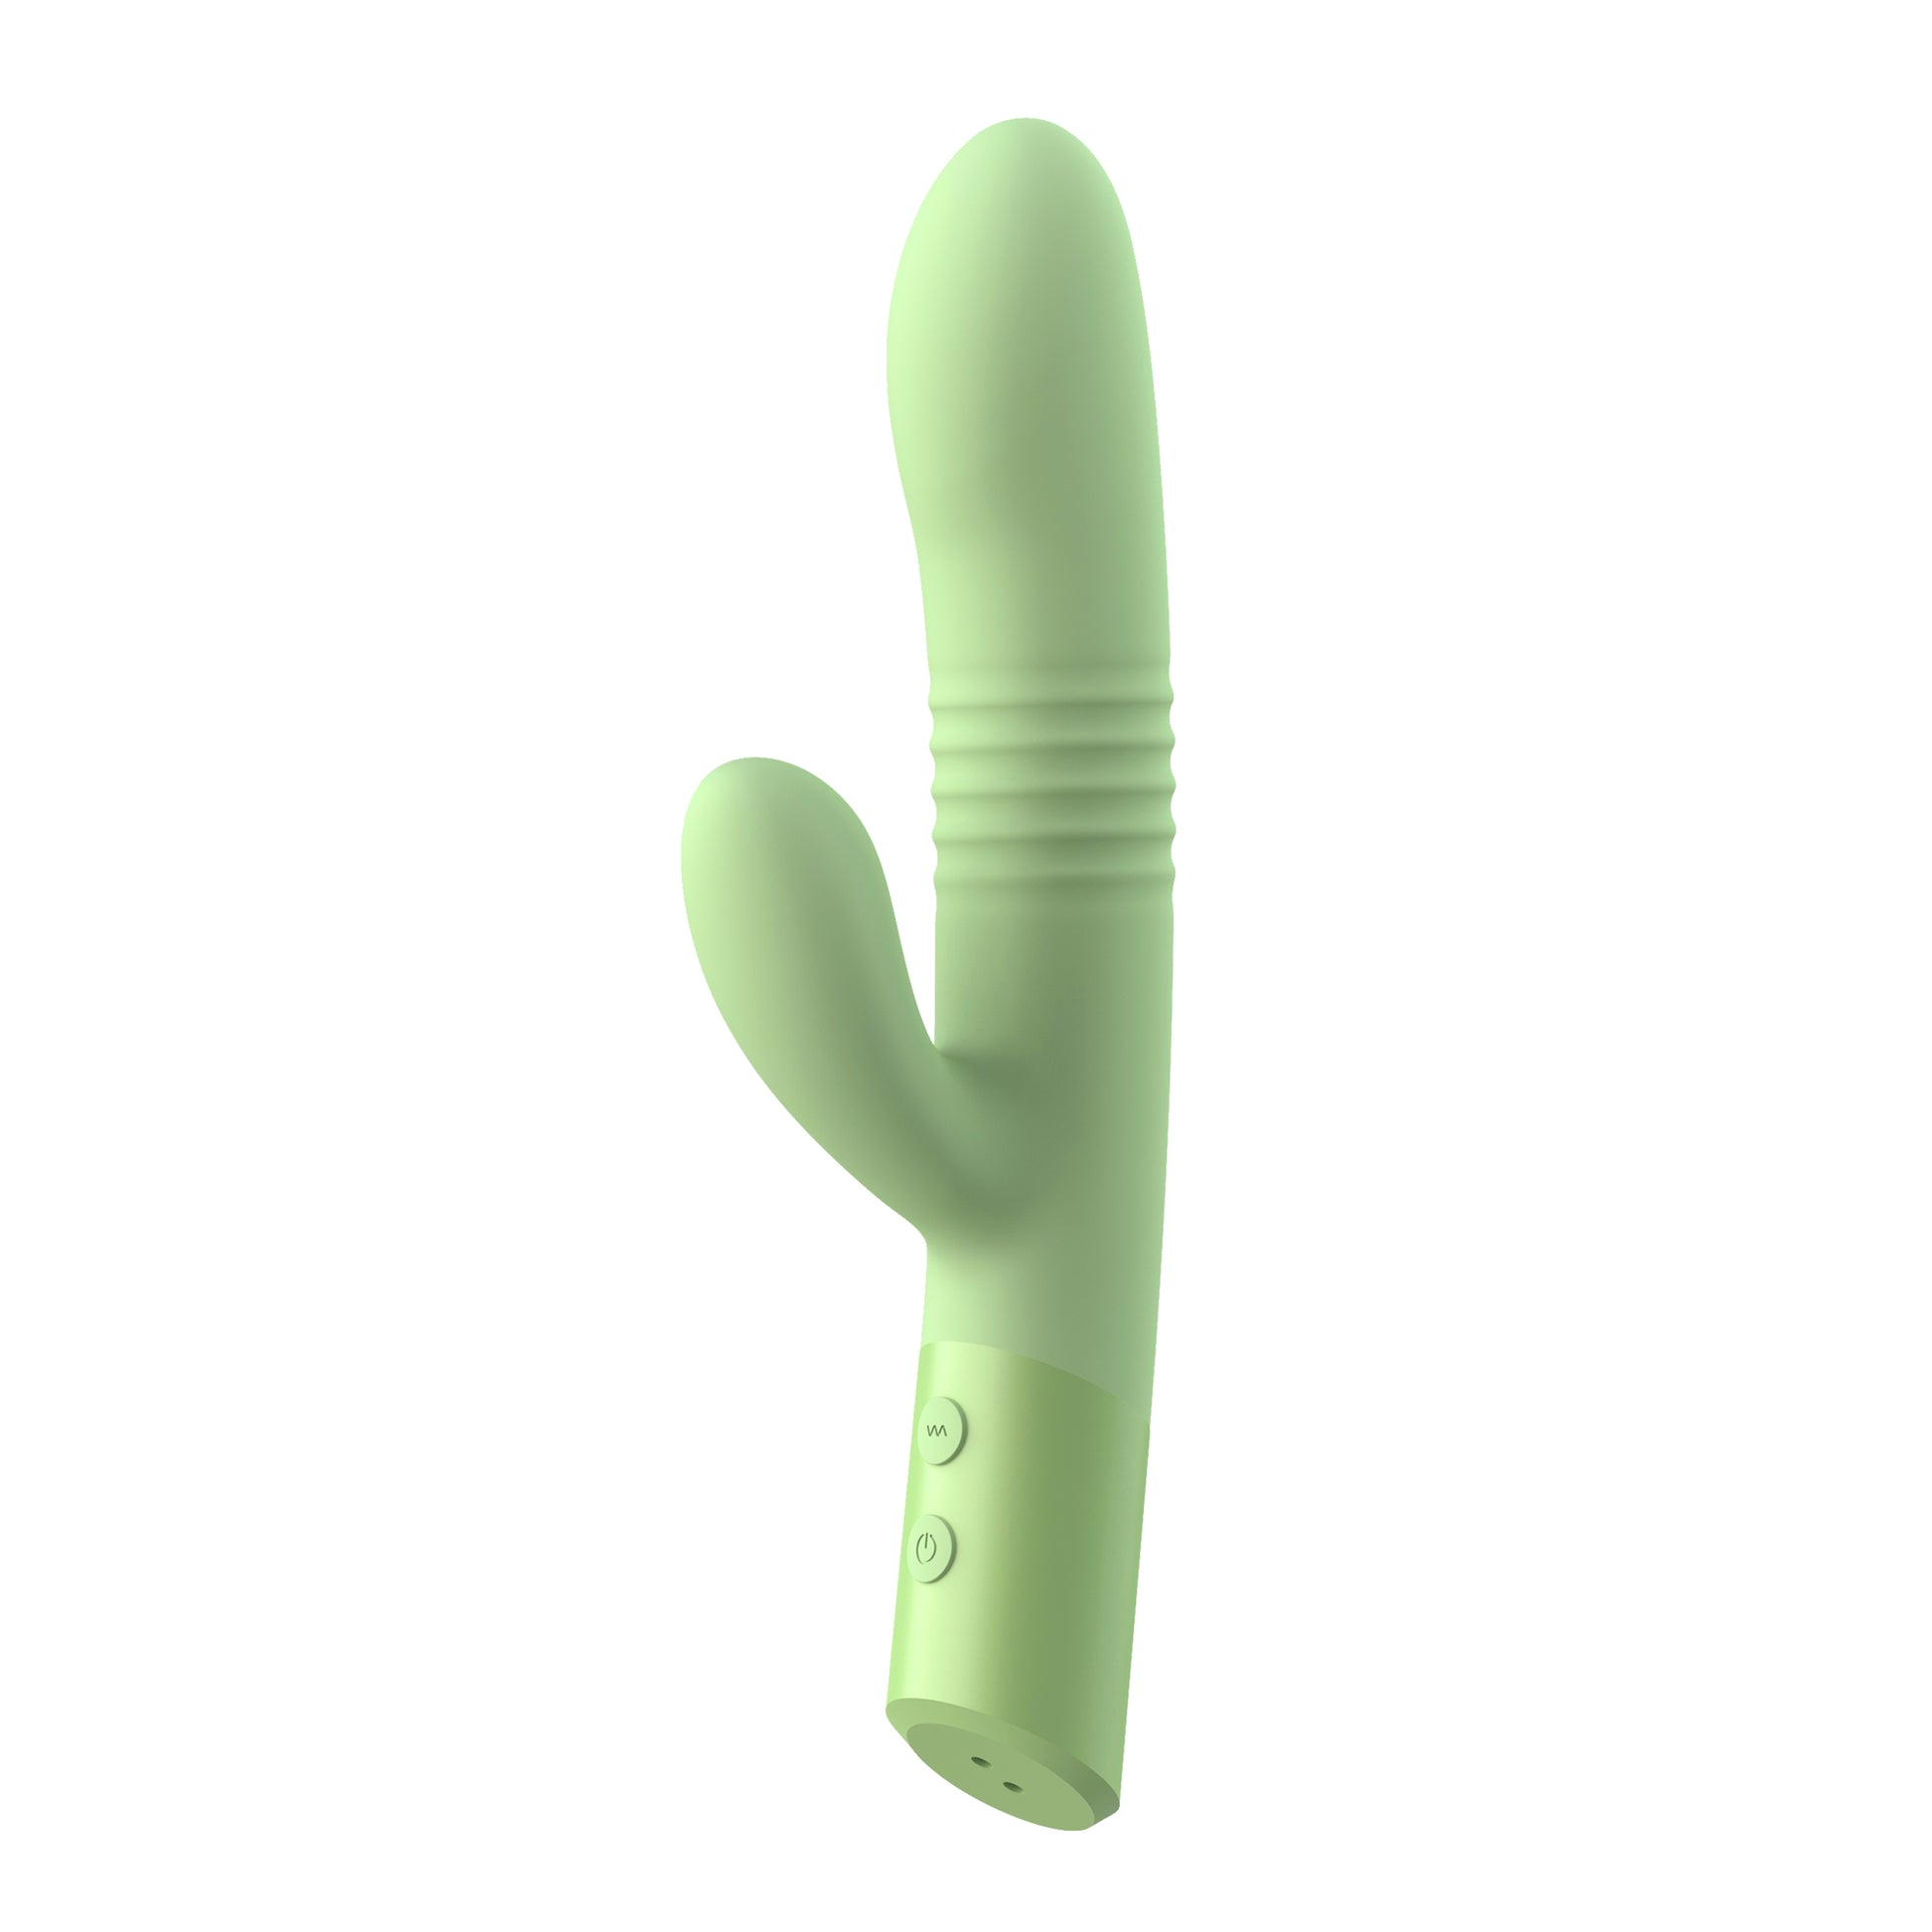 Isabella Thrusting Rabbit Vibrator - 100% Carbon Neutral Vibrator. The ultimate sustainable sex toy. 